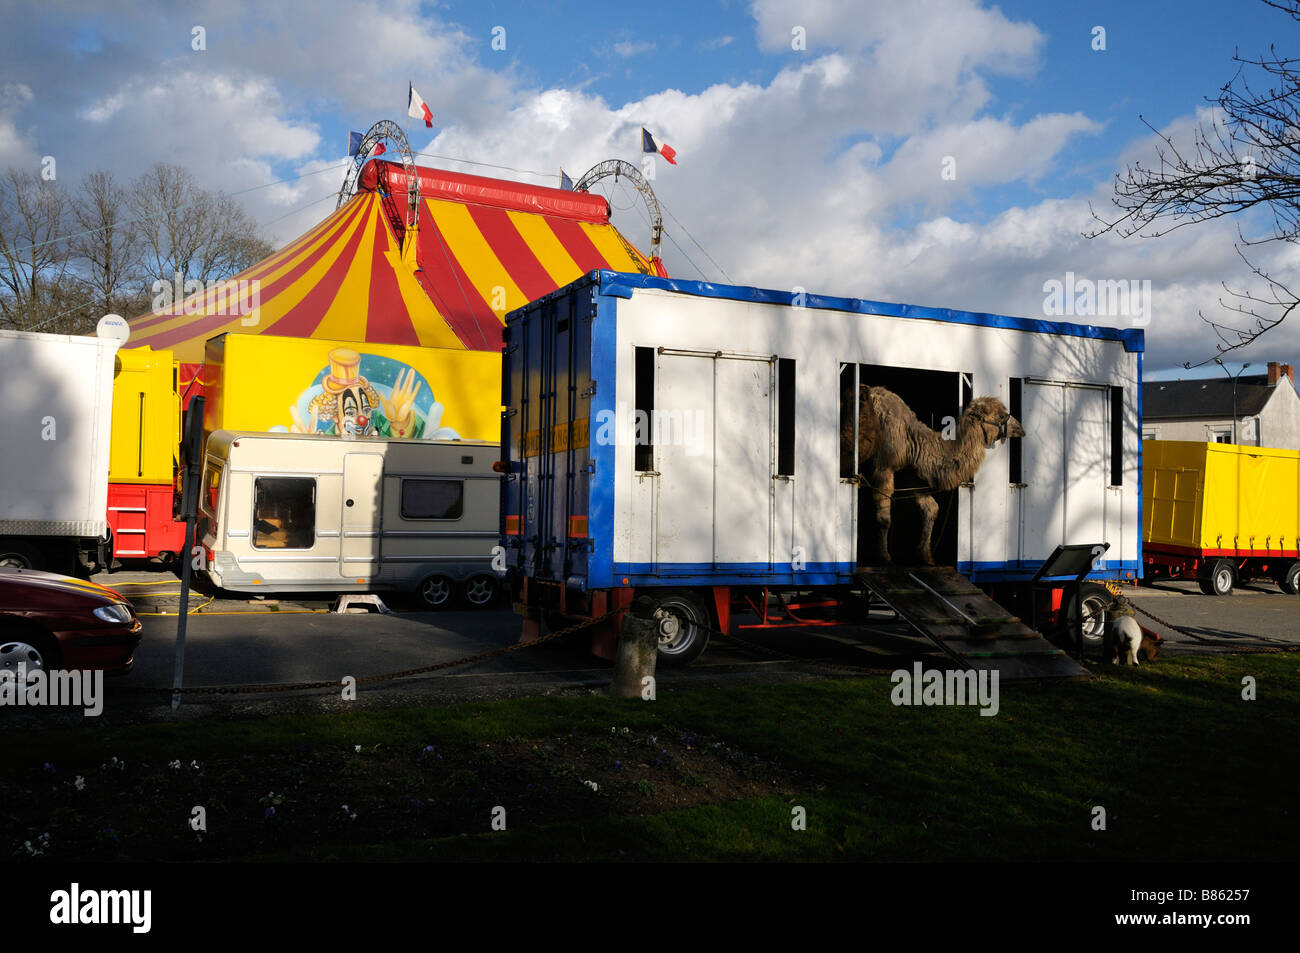 Stock photo of the big top from the Zavatta european circus The photo was taken in Bellac France Stock Photo